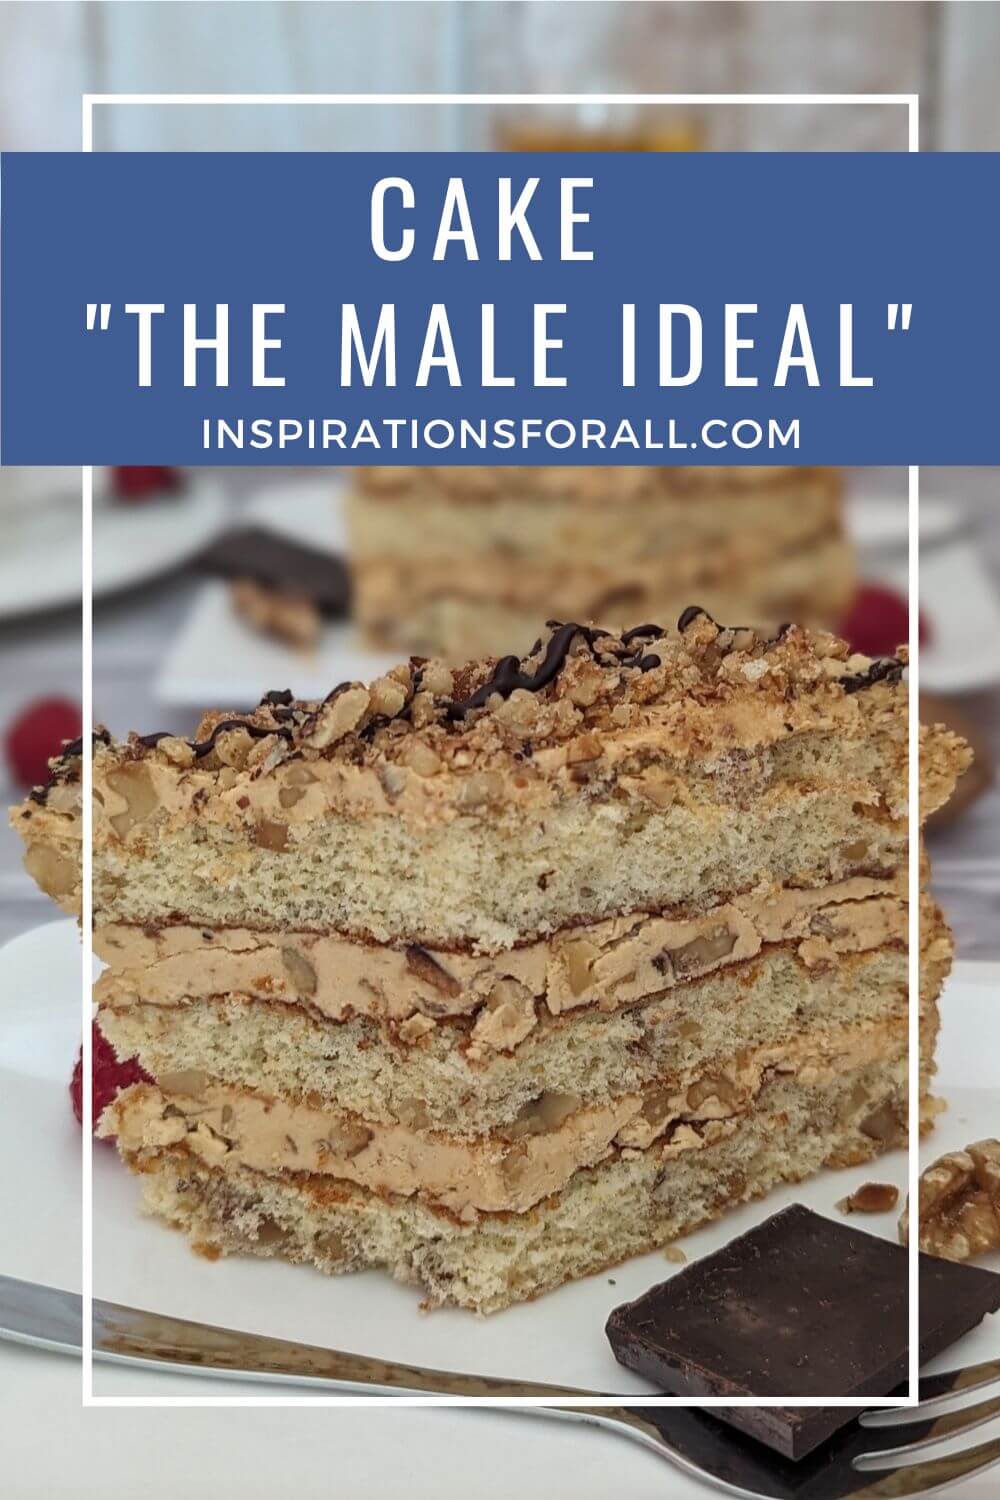 Pin Cake "The male ideal"